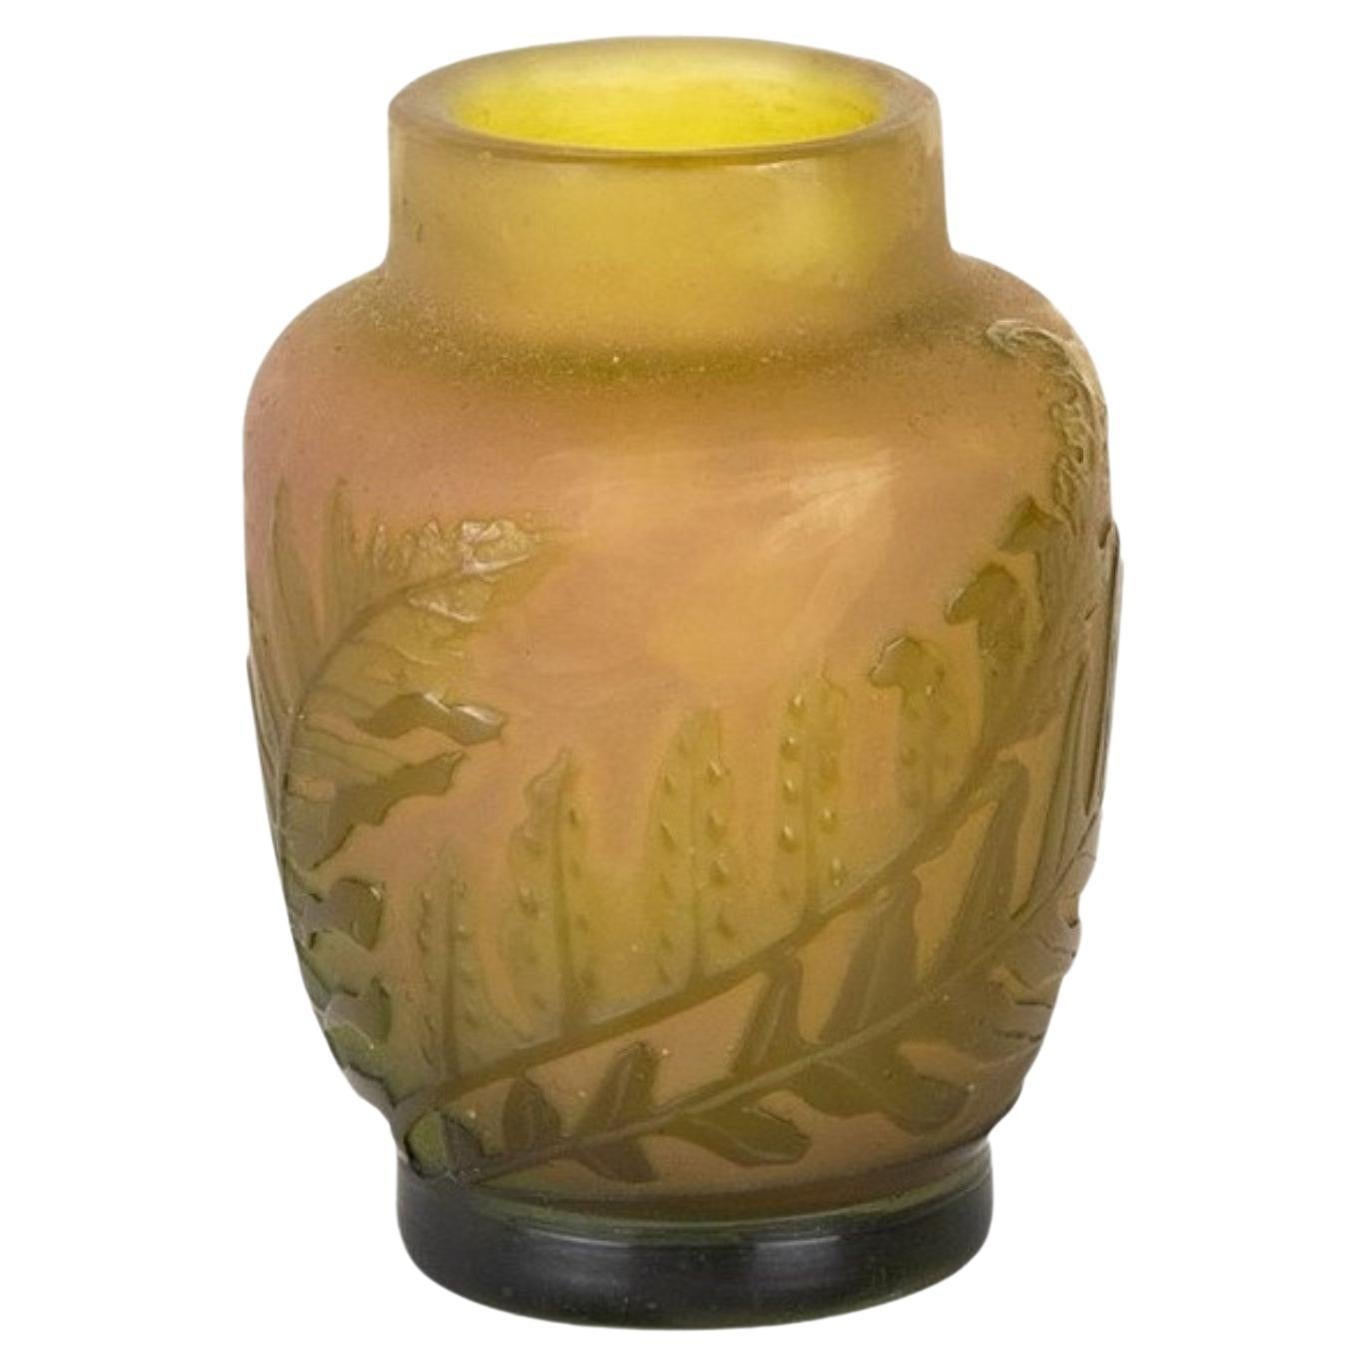 Cameo Glass Vase Green Fern by Emile Galle, 20th Century